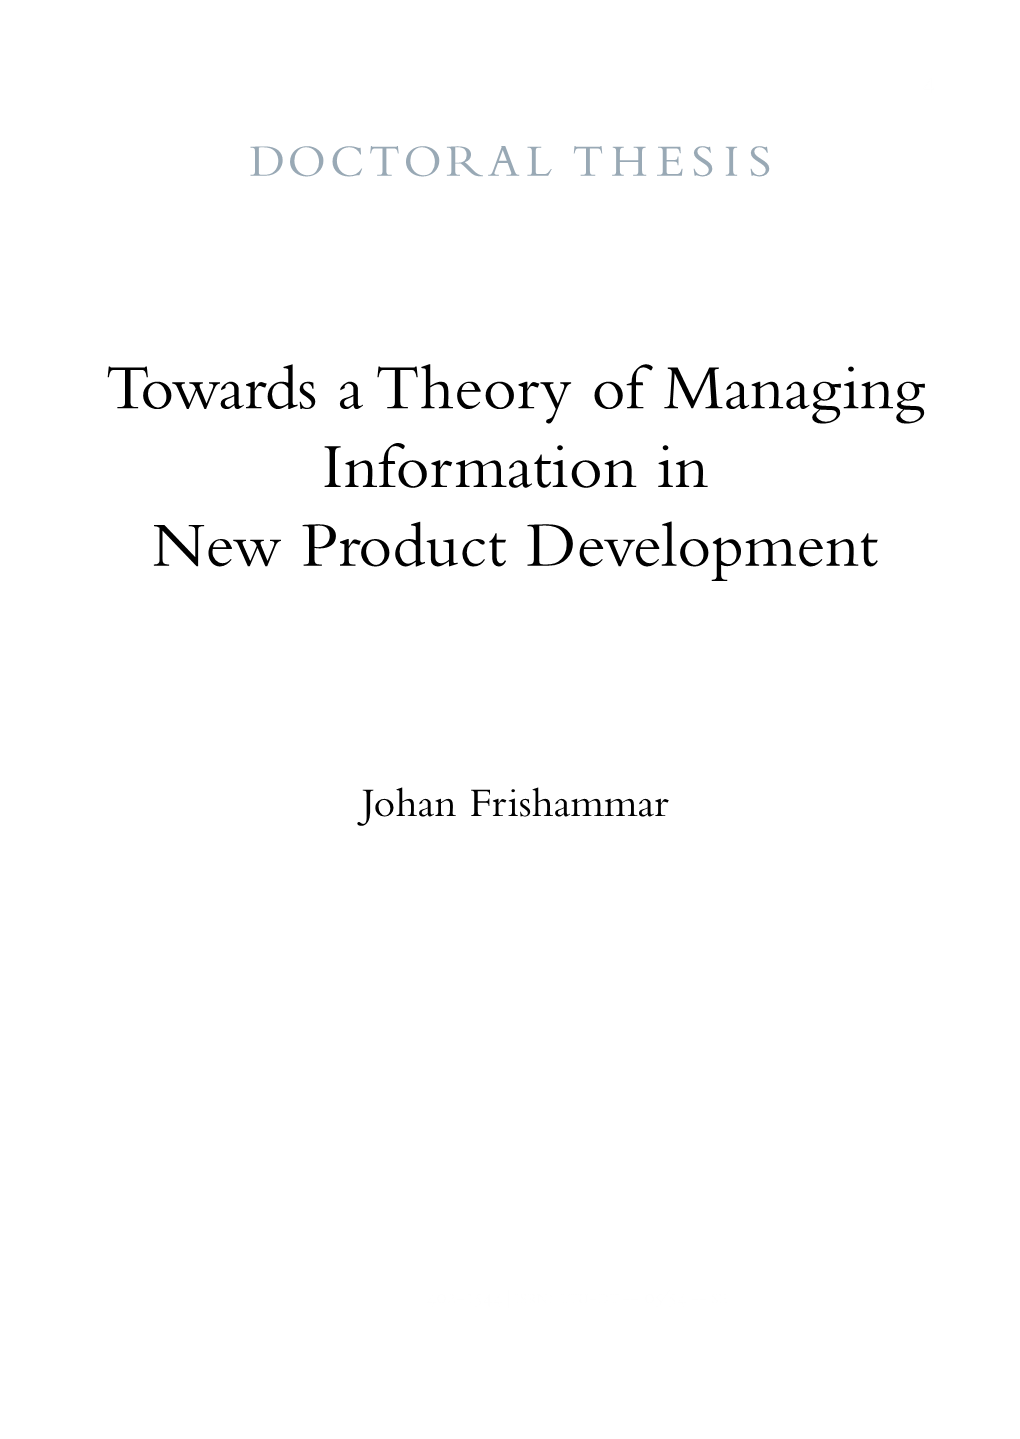 Towards a Theory of Managing Information in New Product Development